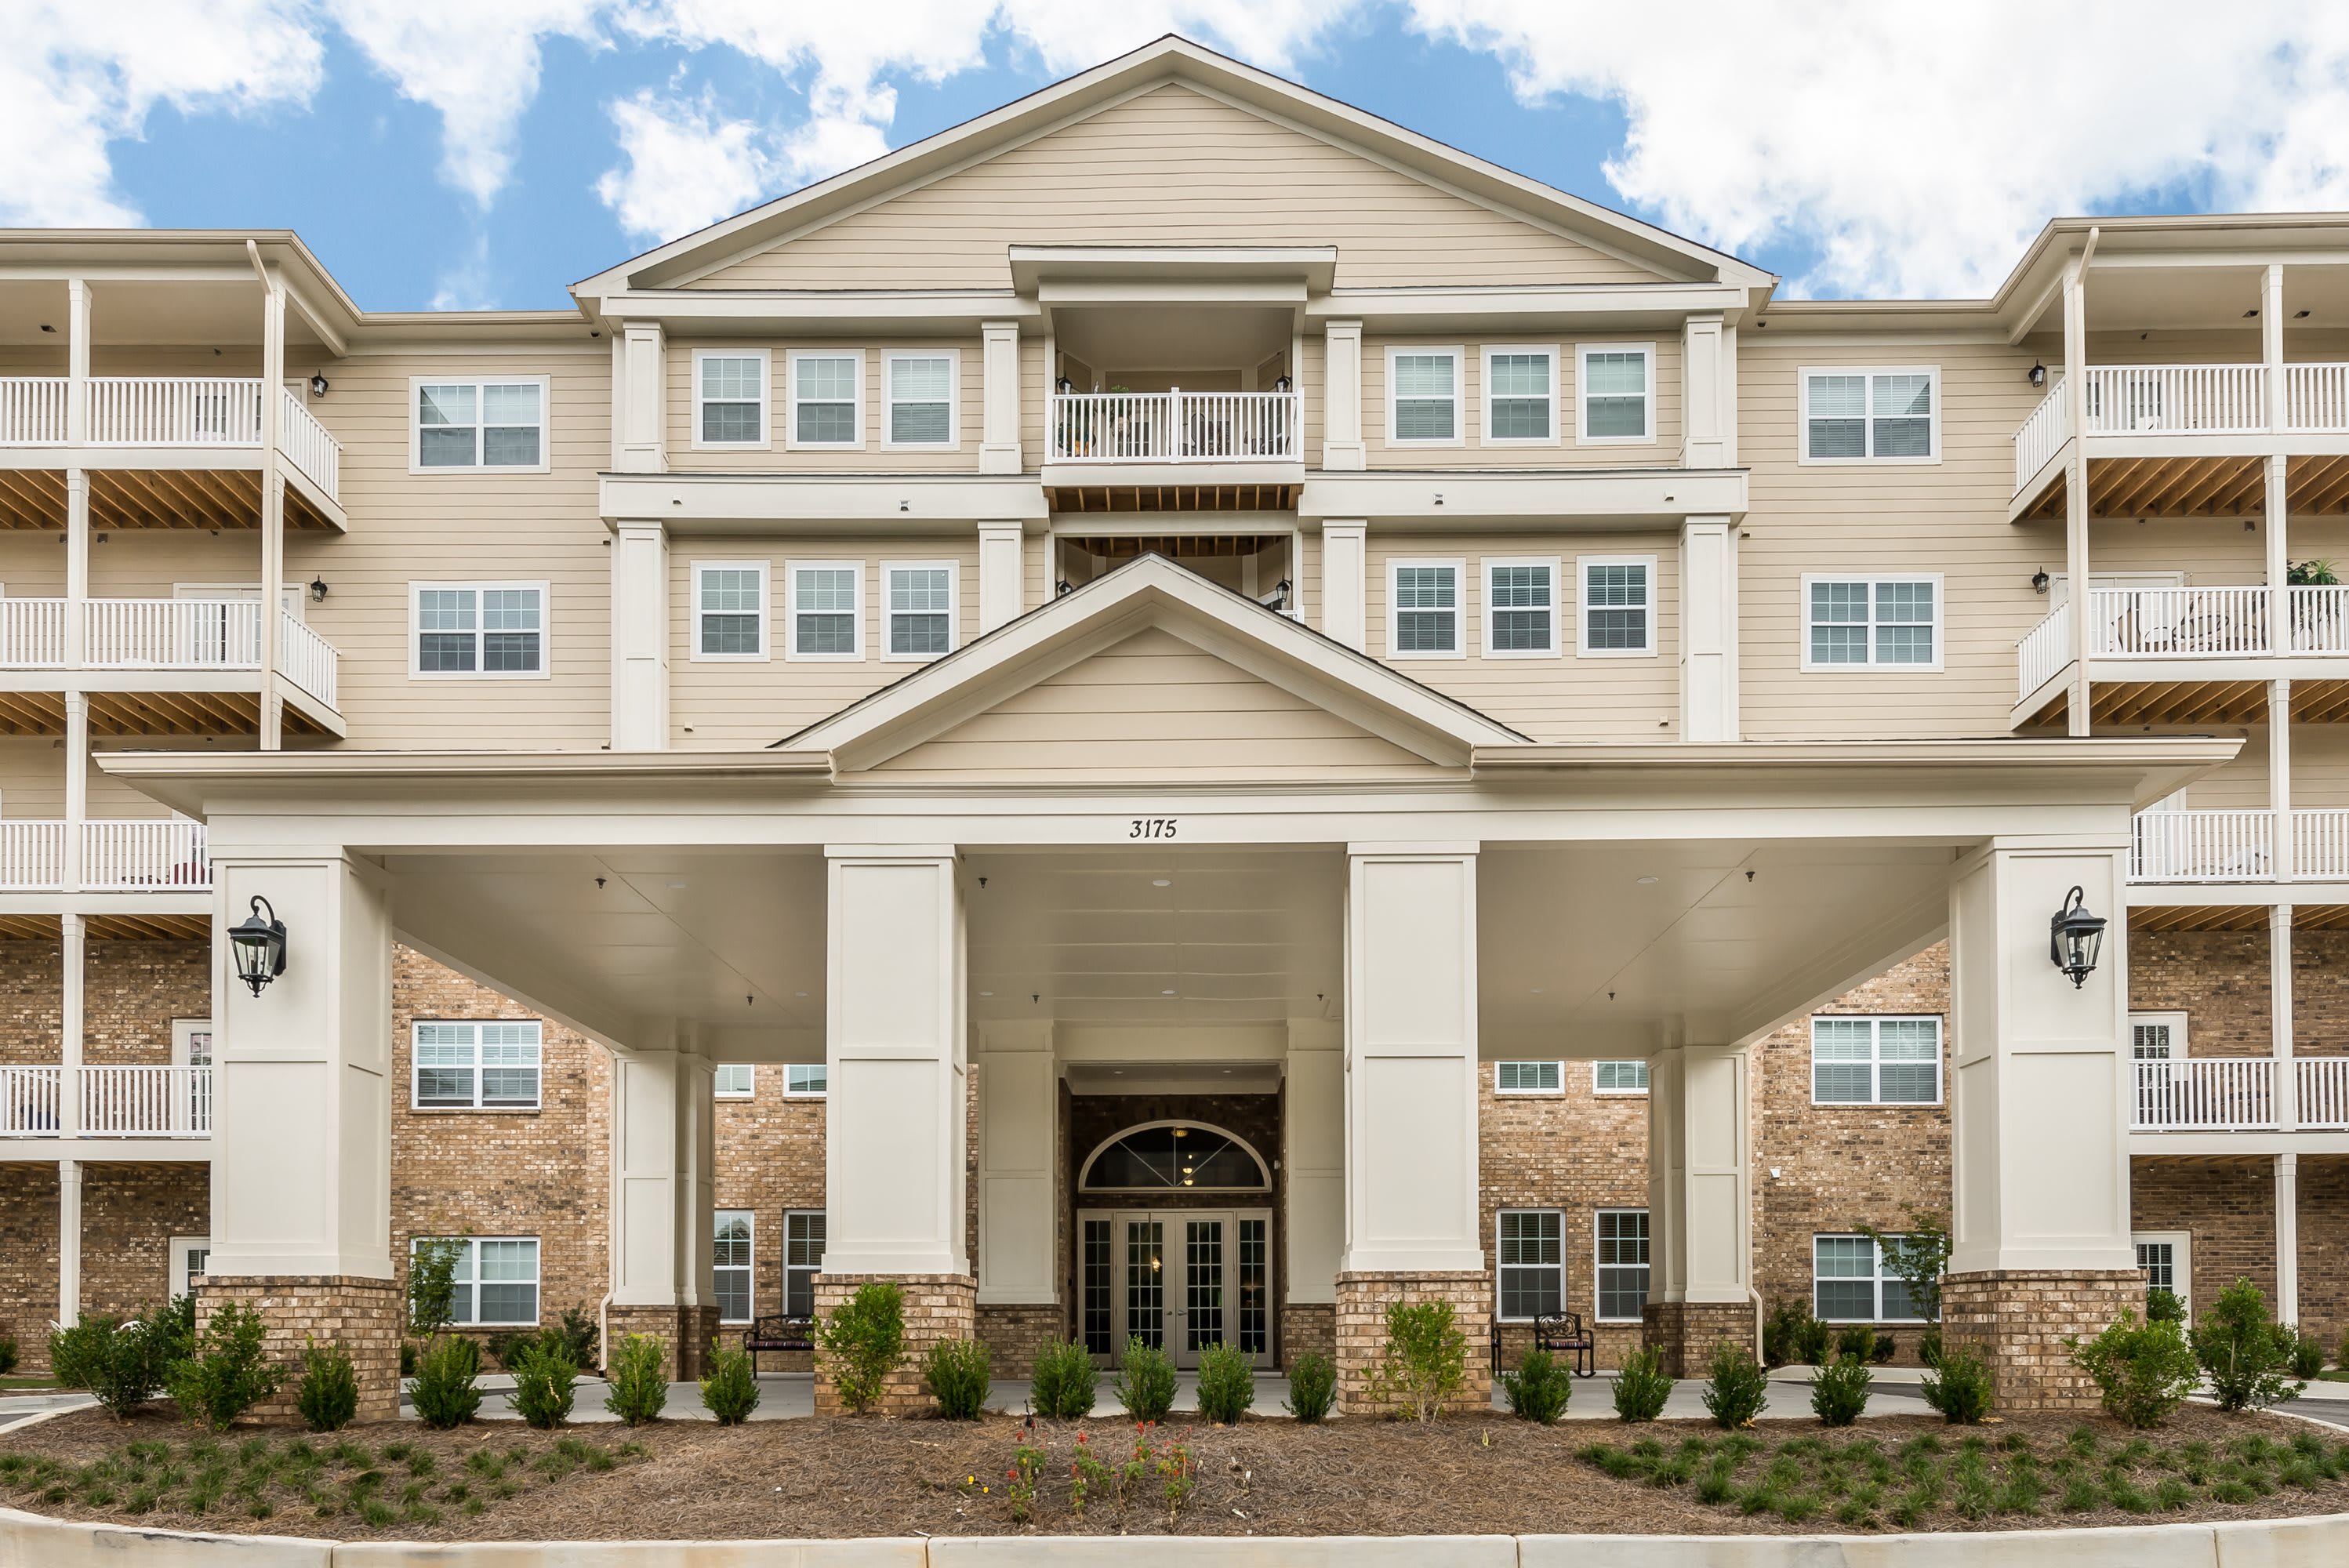 The Mansions at Sandy Springs Senior Independent Living community exterior